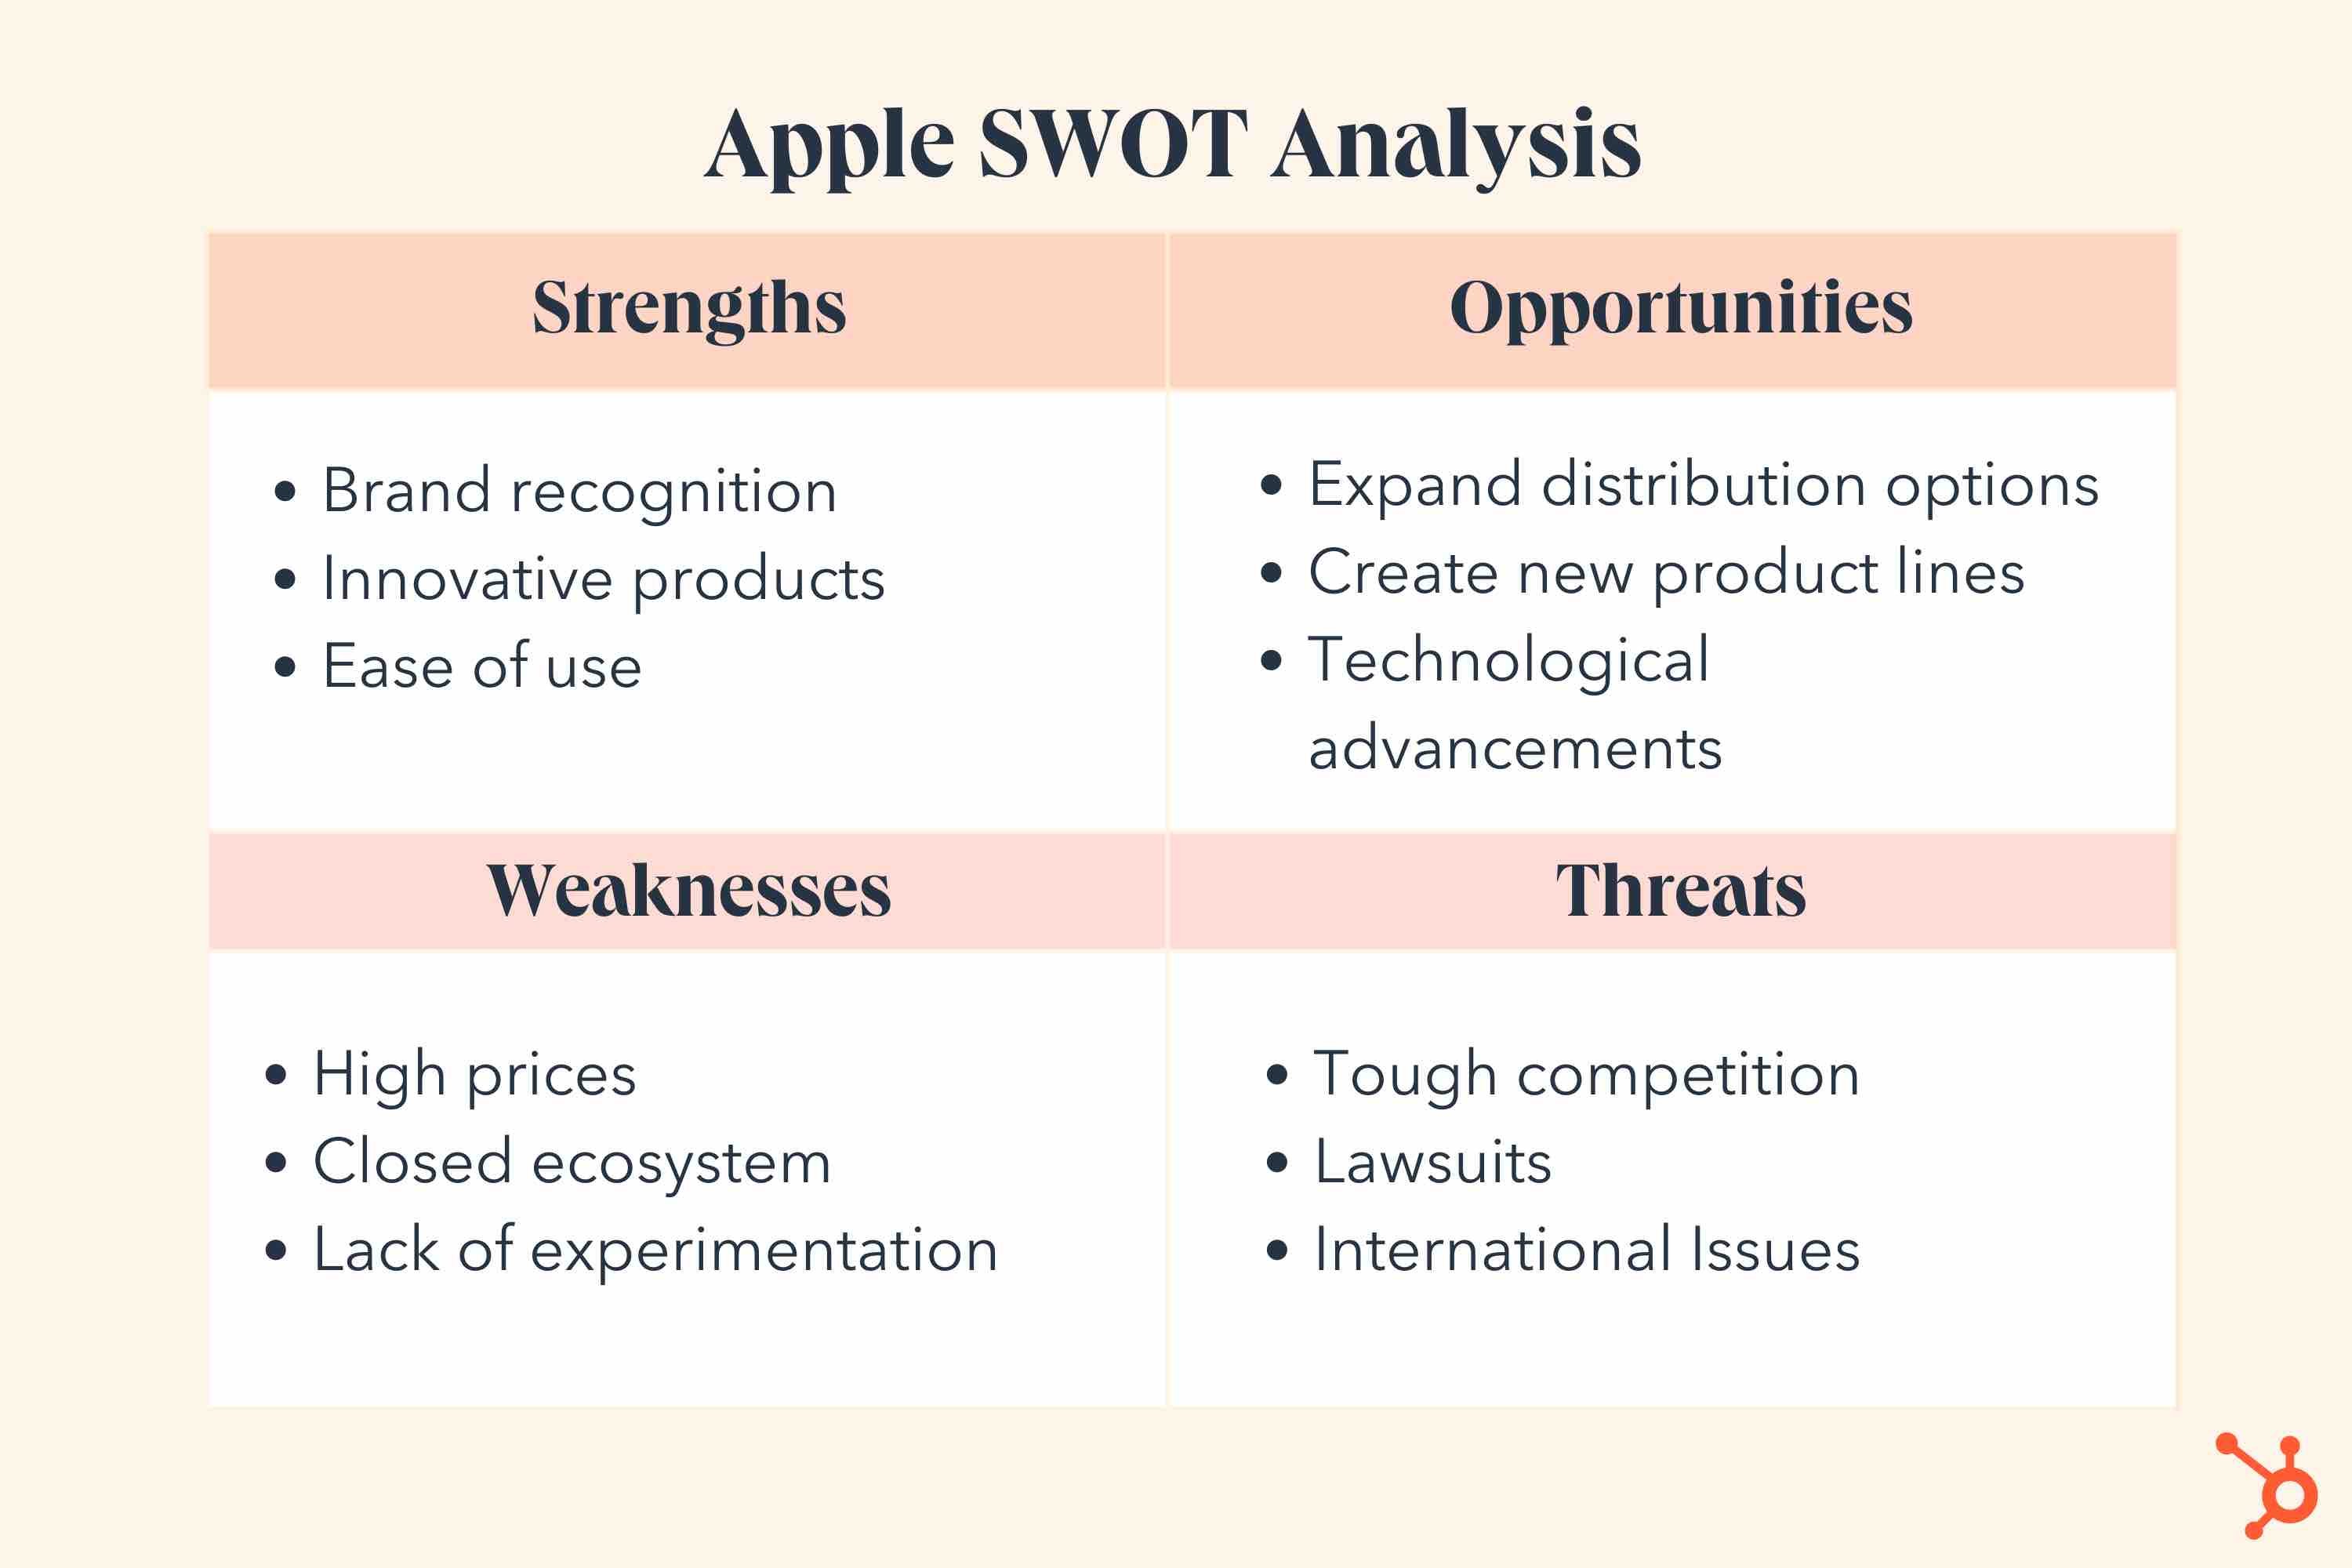 An example SWOT analysis of Apple.